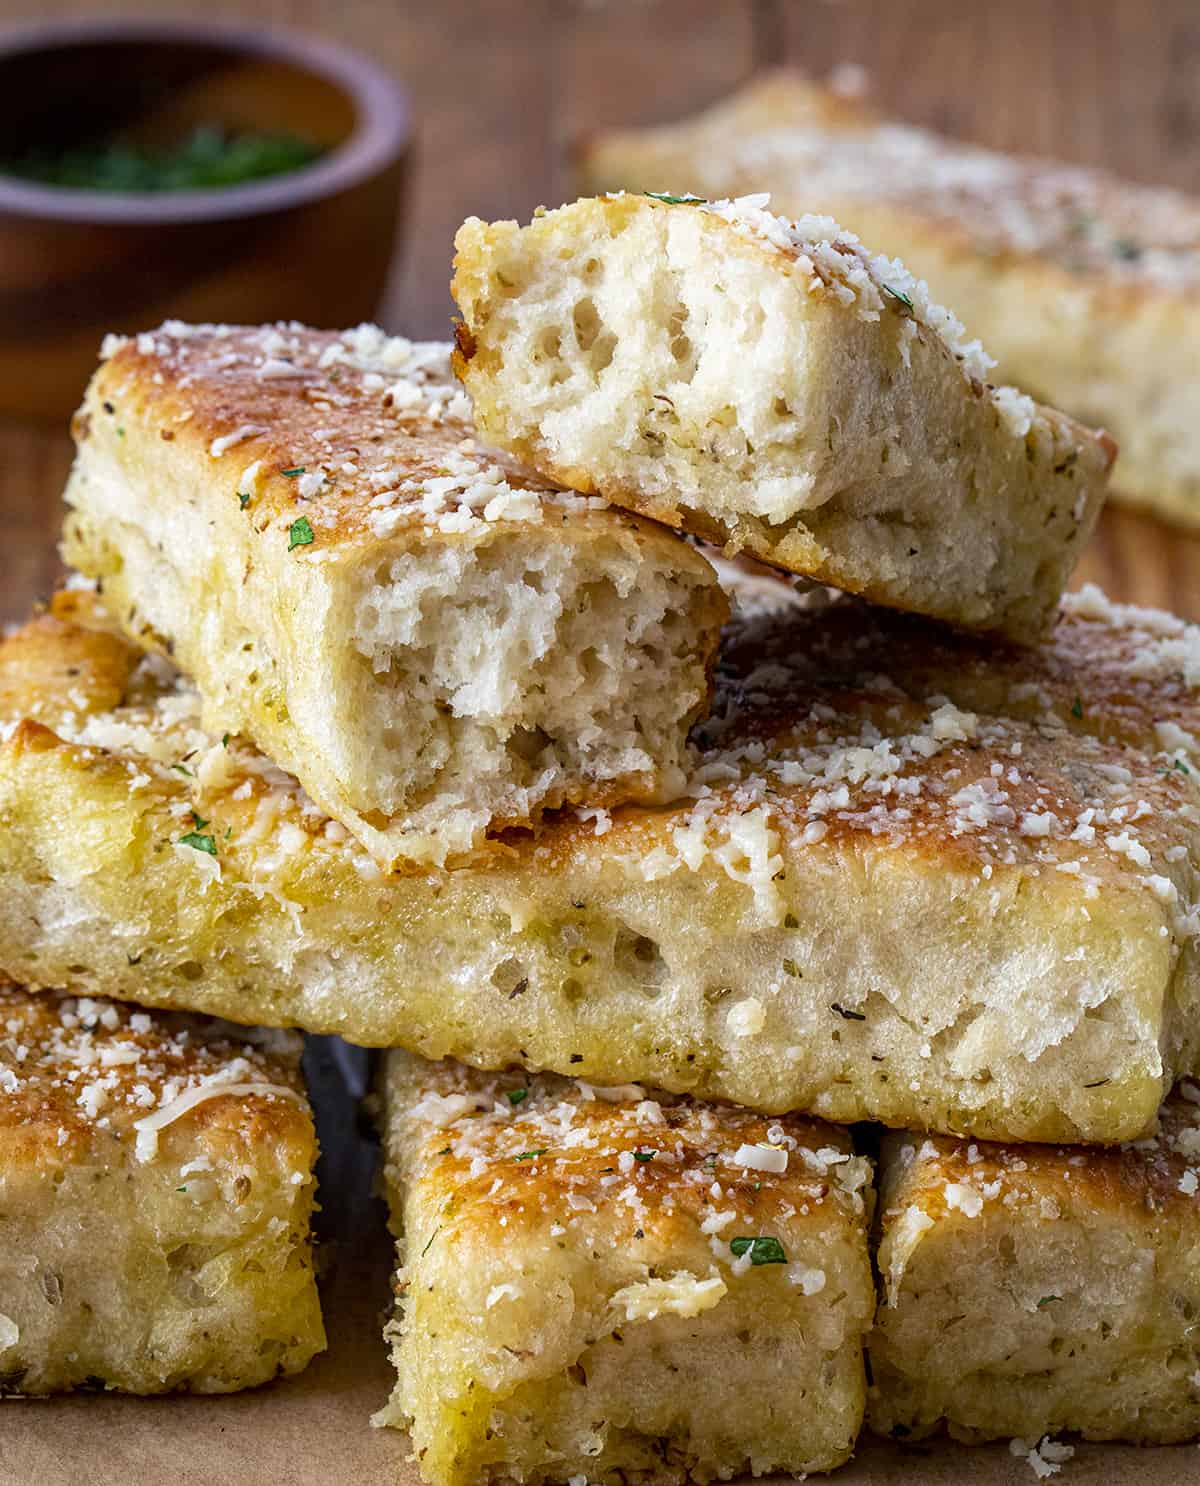 Stacks of Focaccia Breadsticks on a Cutting Board with Pieces Ripped in Half Showing Inside Texture.